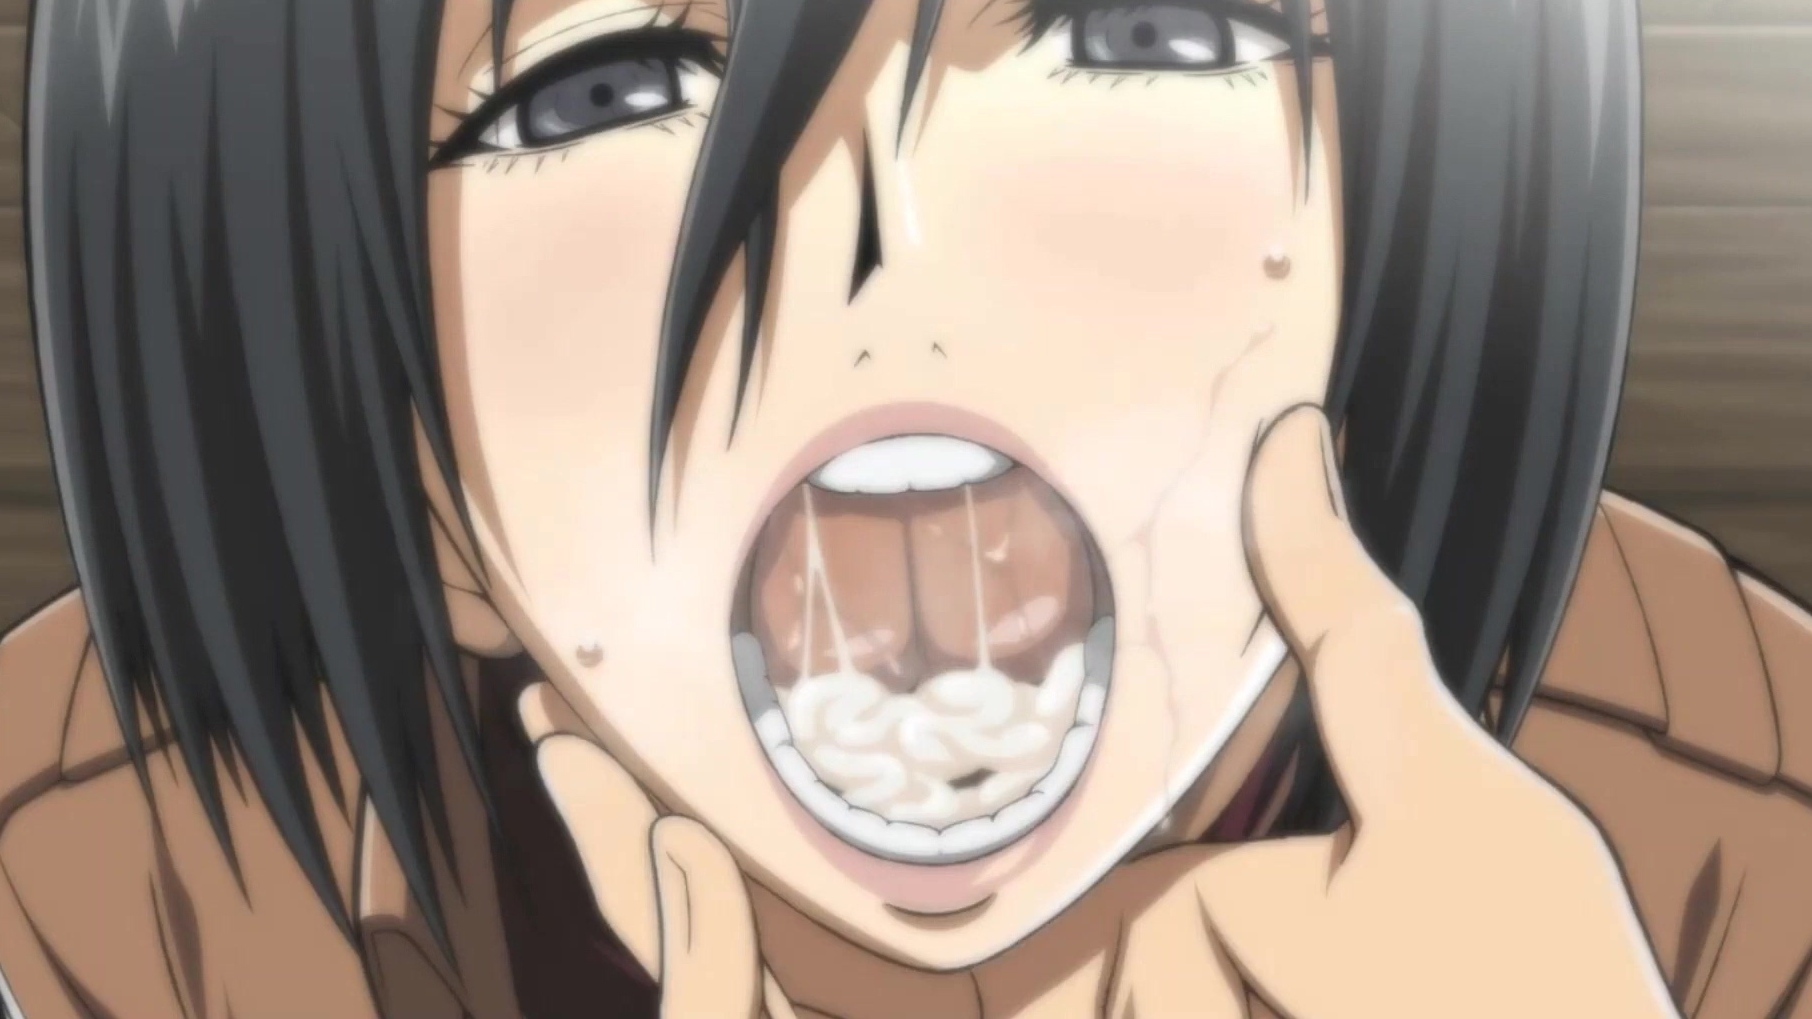 Animation Cum In Mouth - Mikasa Ackerman Blowjobs (Attack on Titans)